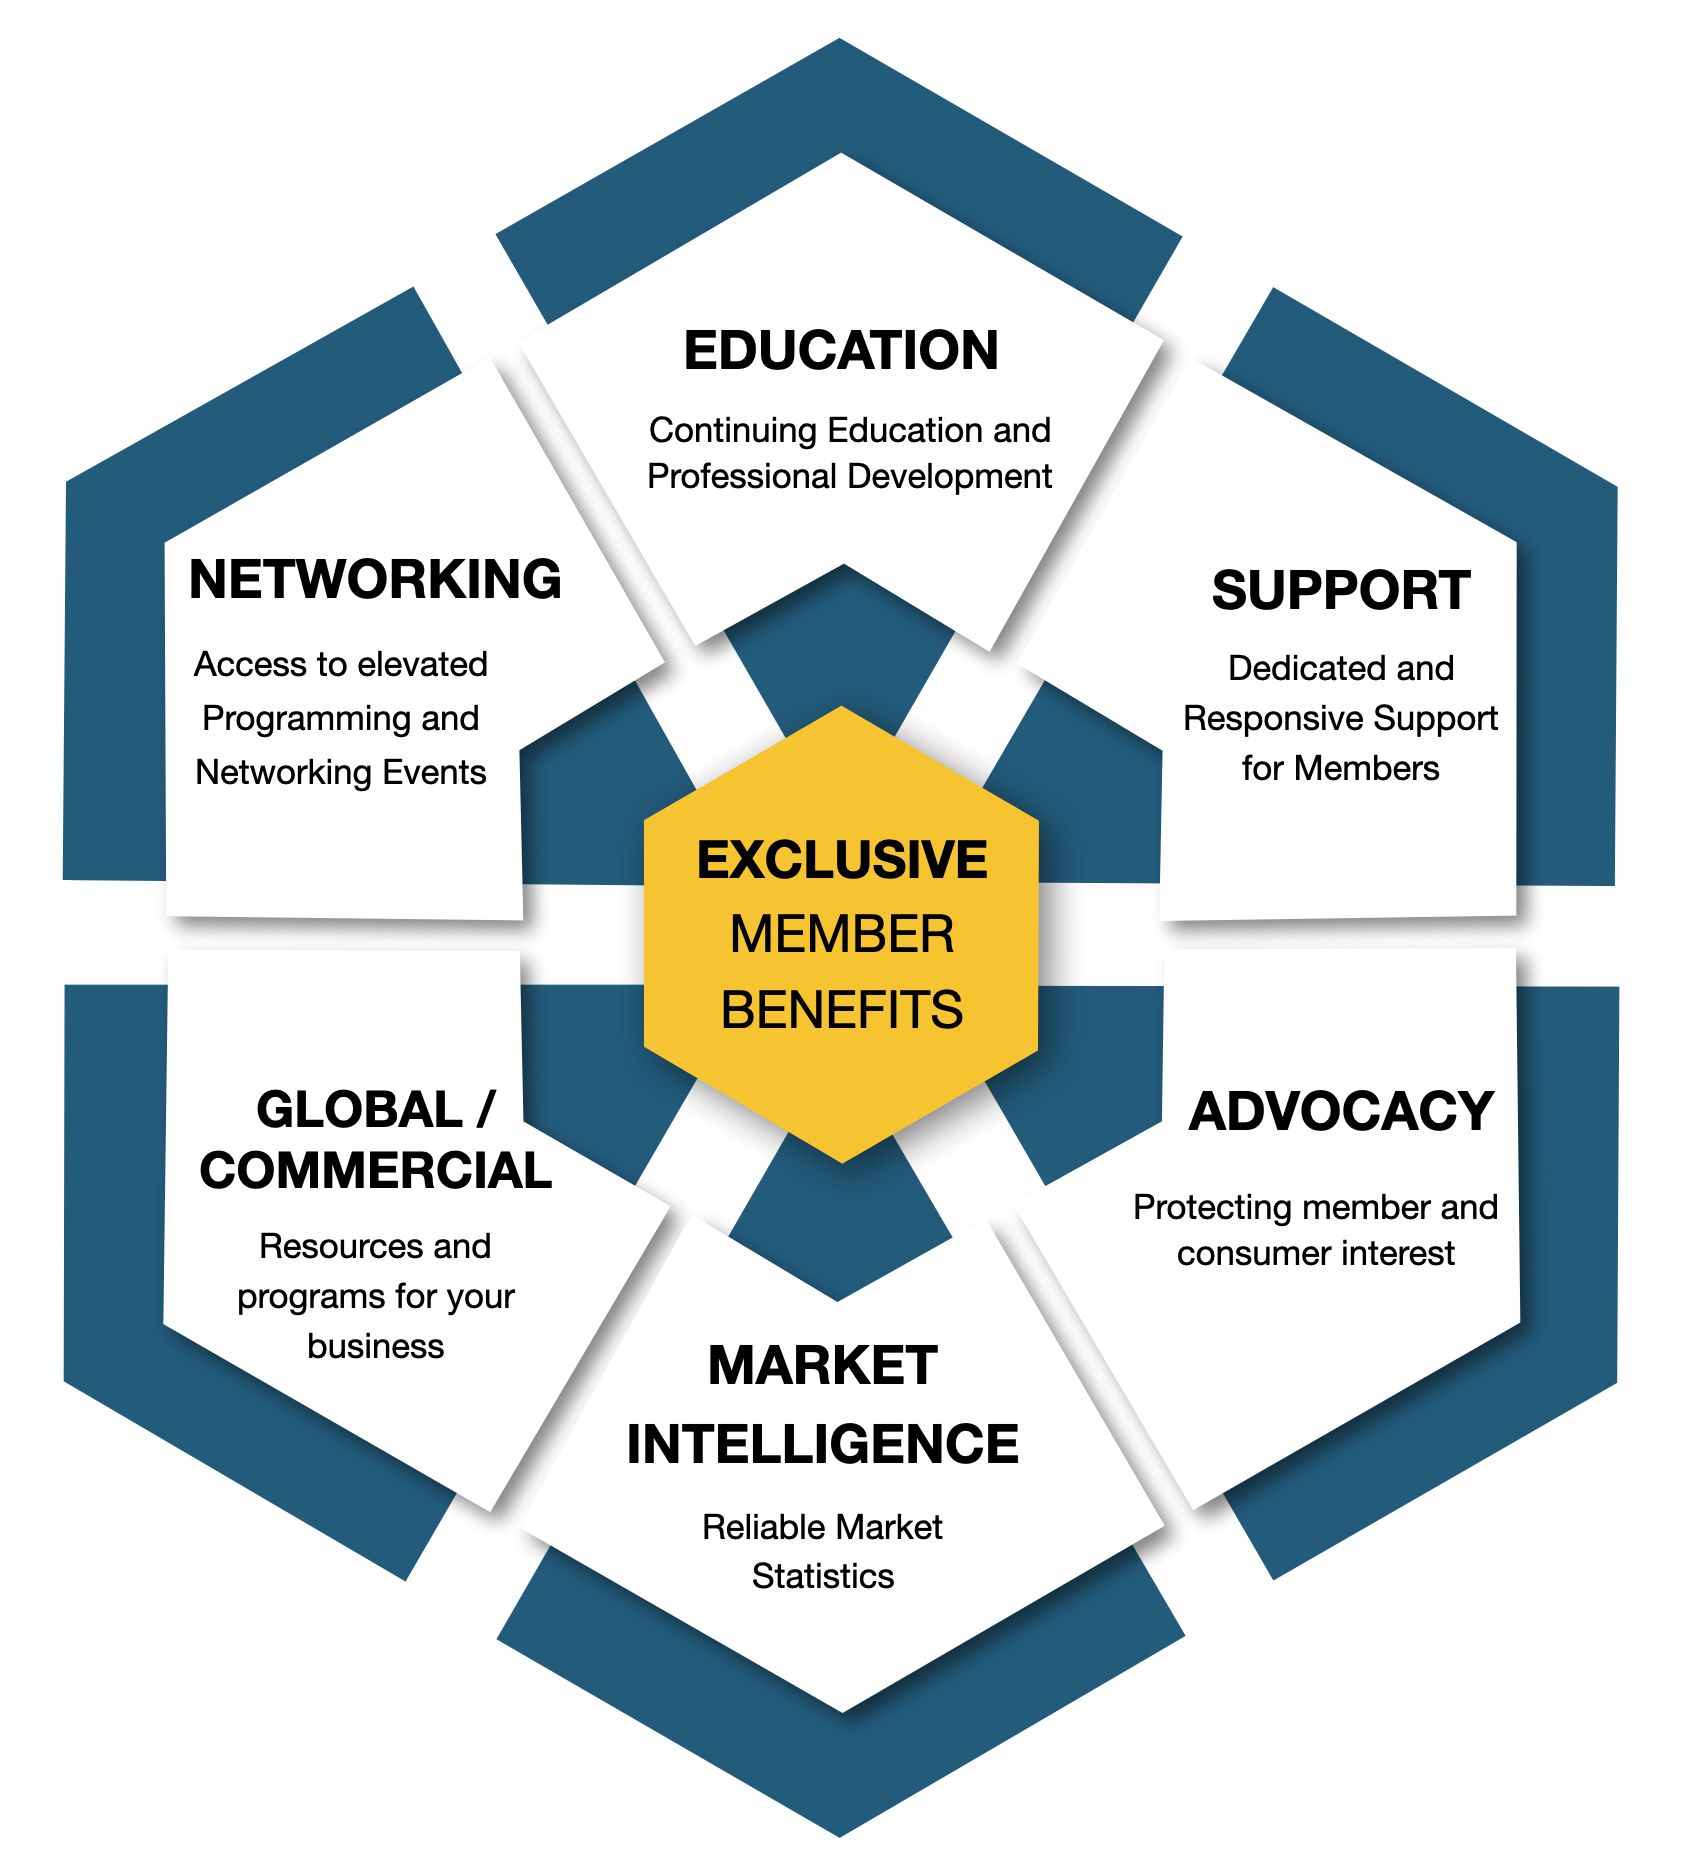 Exclusive Member Benefits: Education, Support, Advocacy, Market Intelligence, Global/Commercial, and Networking